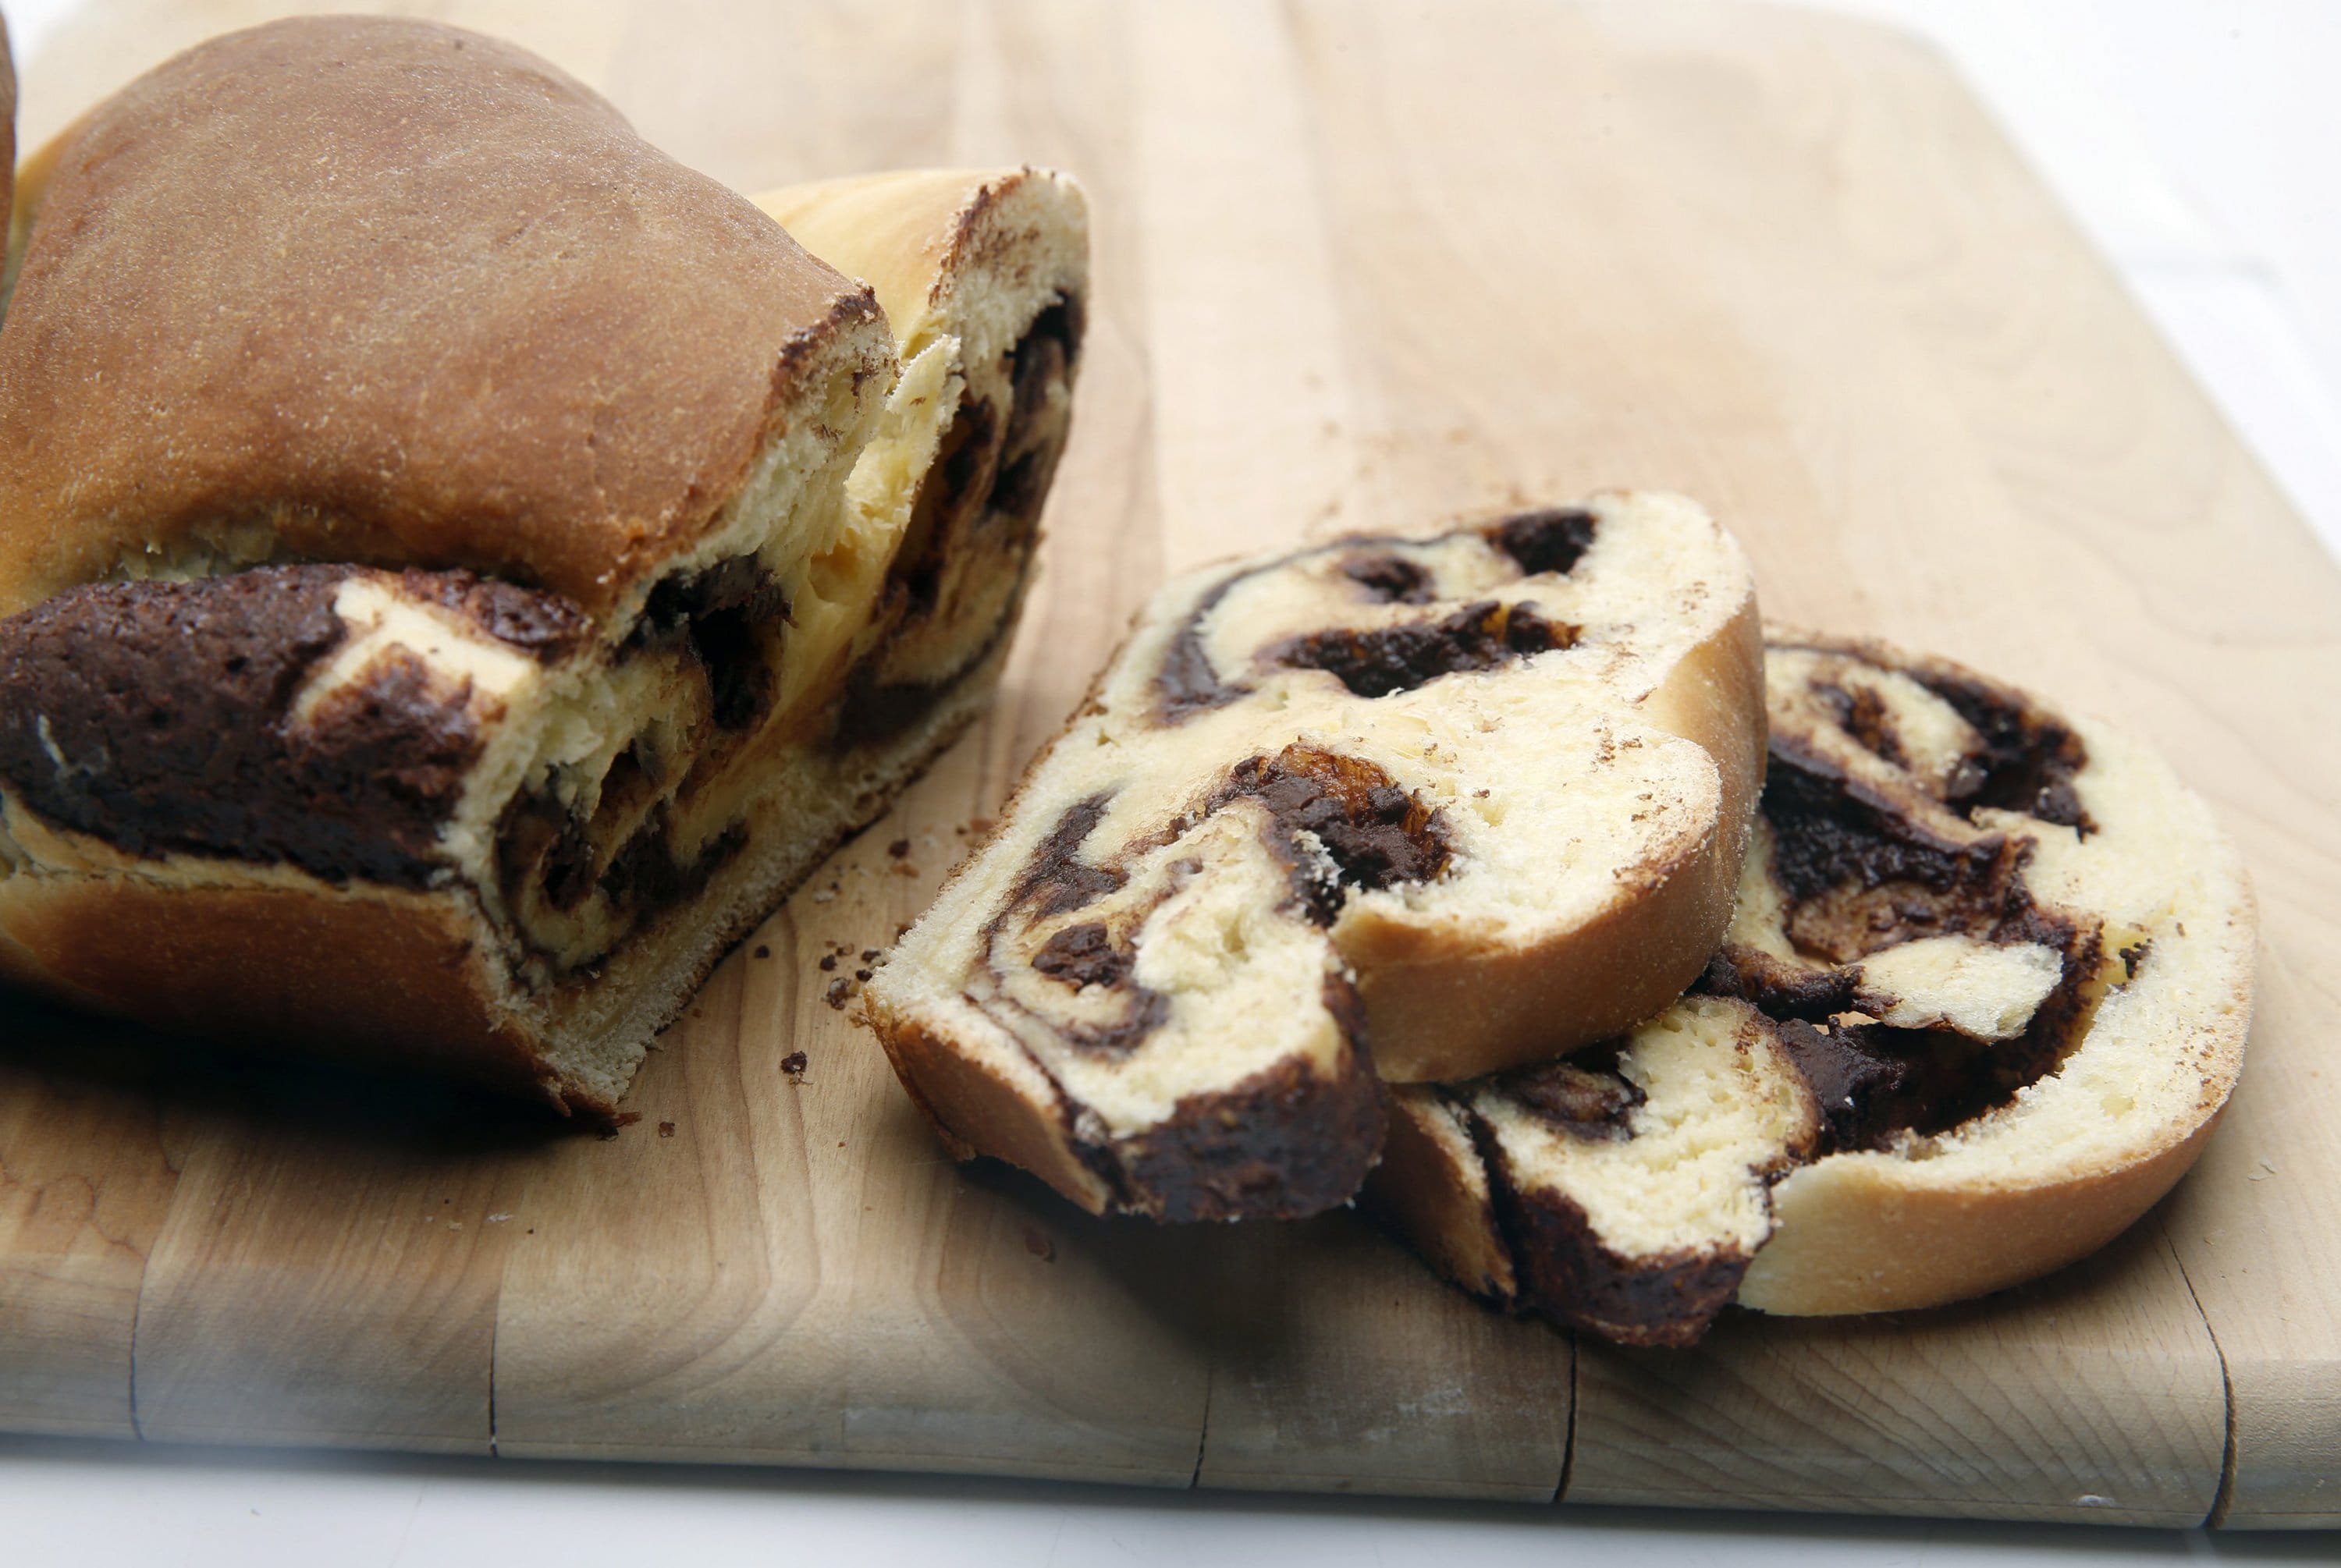 Chocolate-cinnamon babka is one fabulous variation on the eggy, buttery Eastern-European bread; other options include dried fruits and nuts.